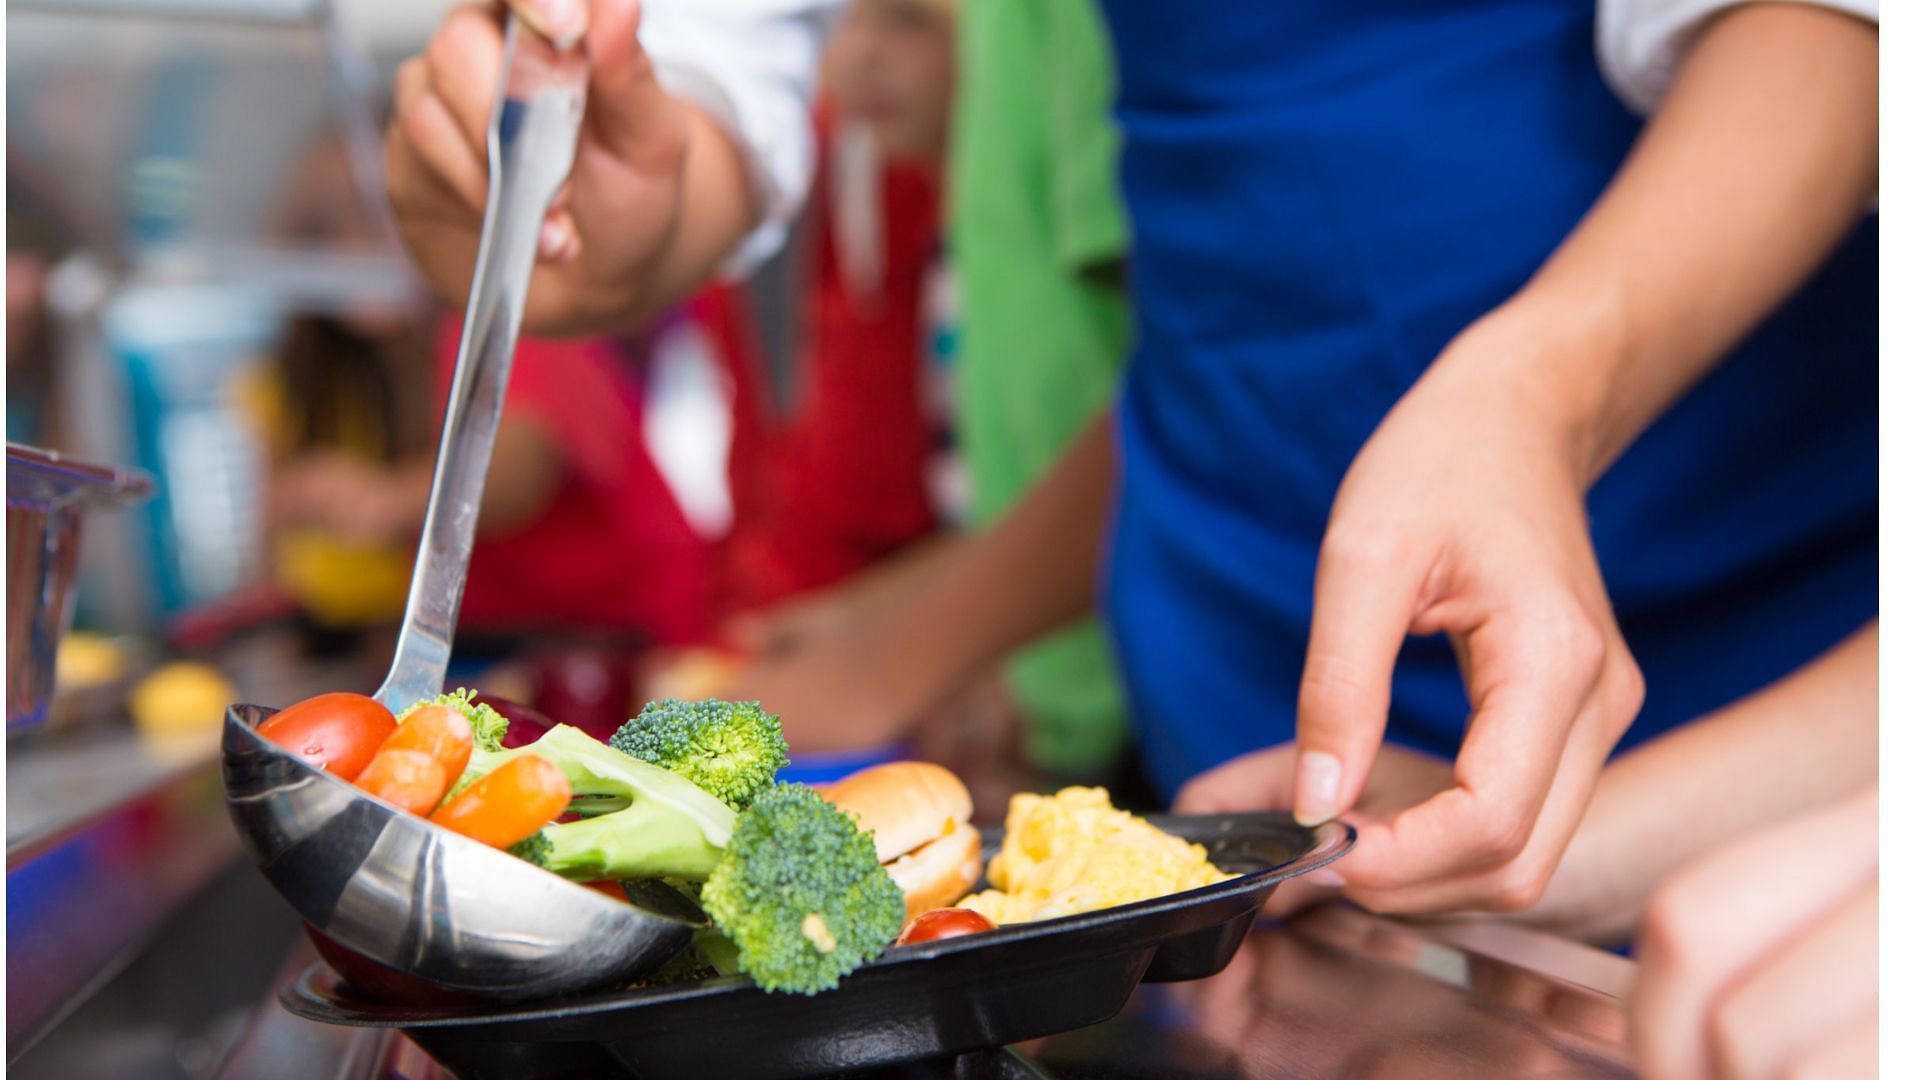 A staff member serves school meals to children on a tray (Image via SDI Productions/Getty Images)